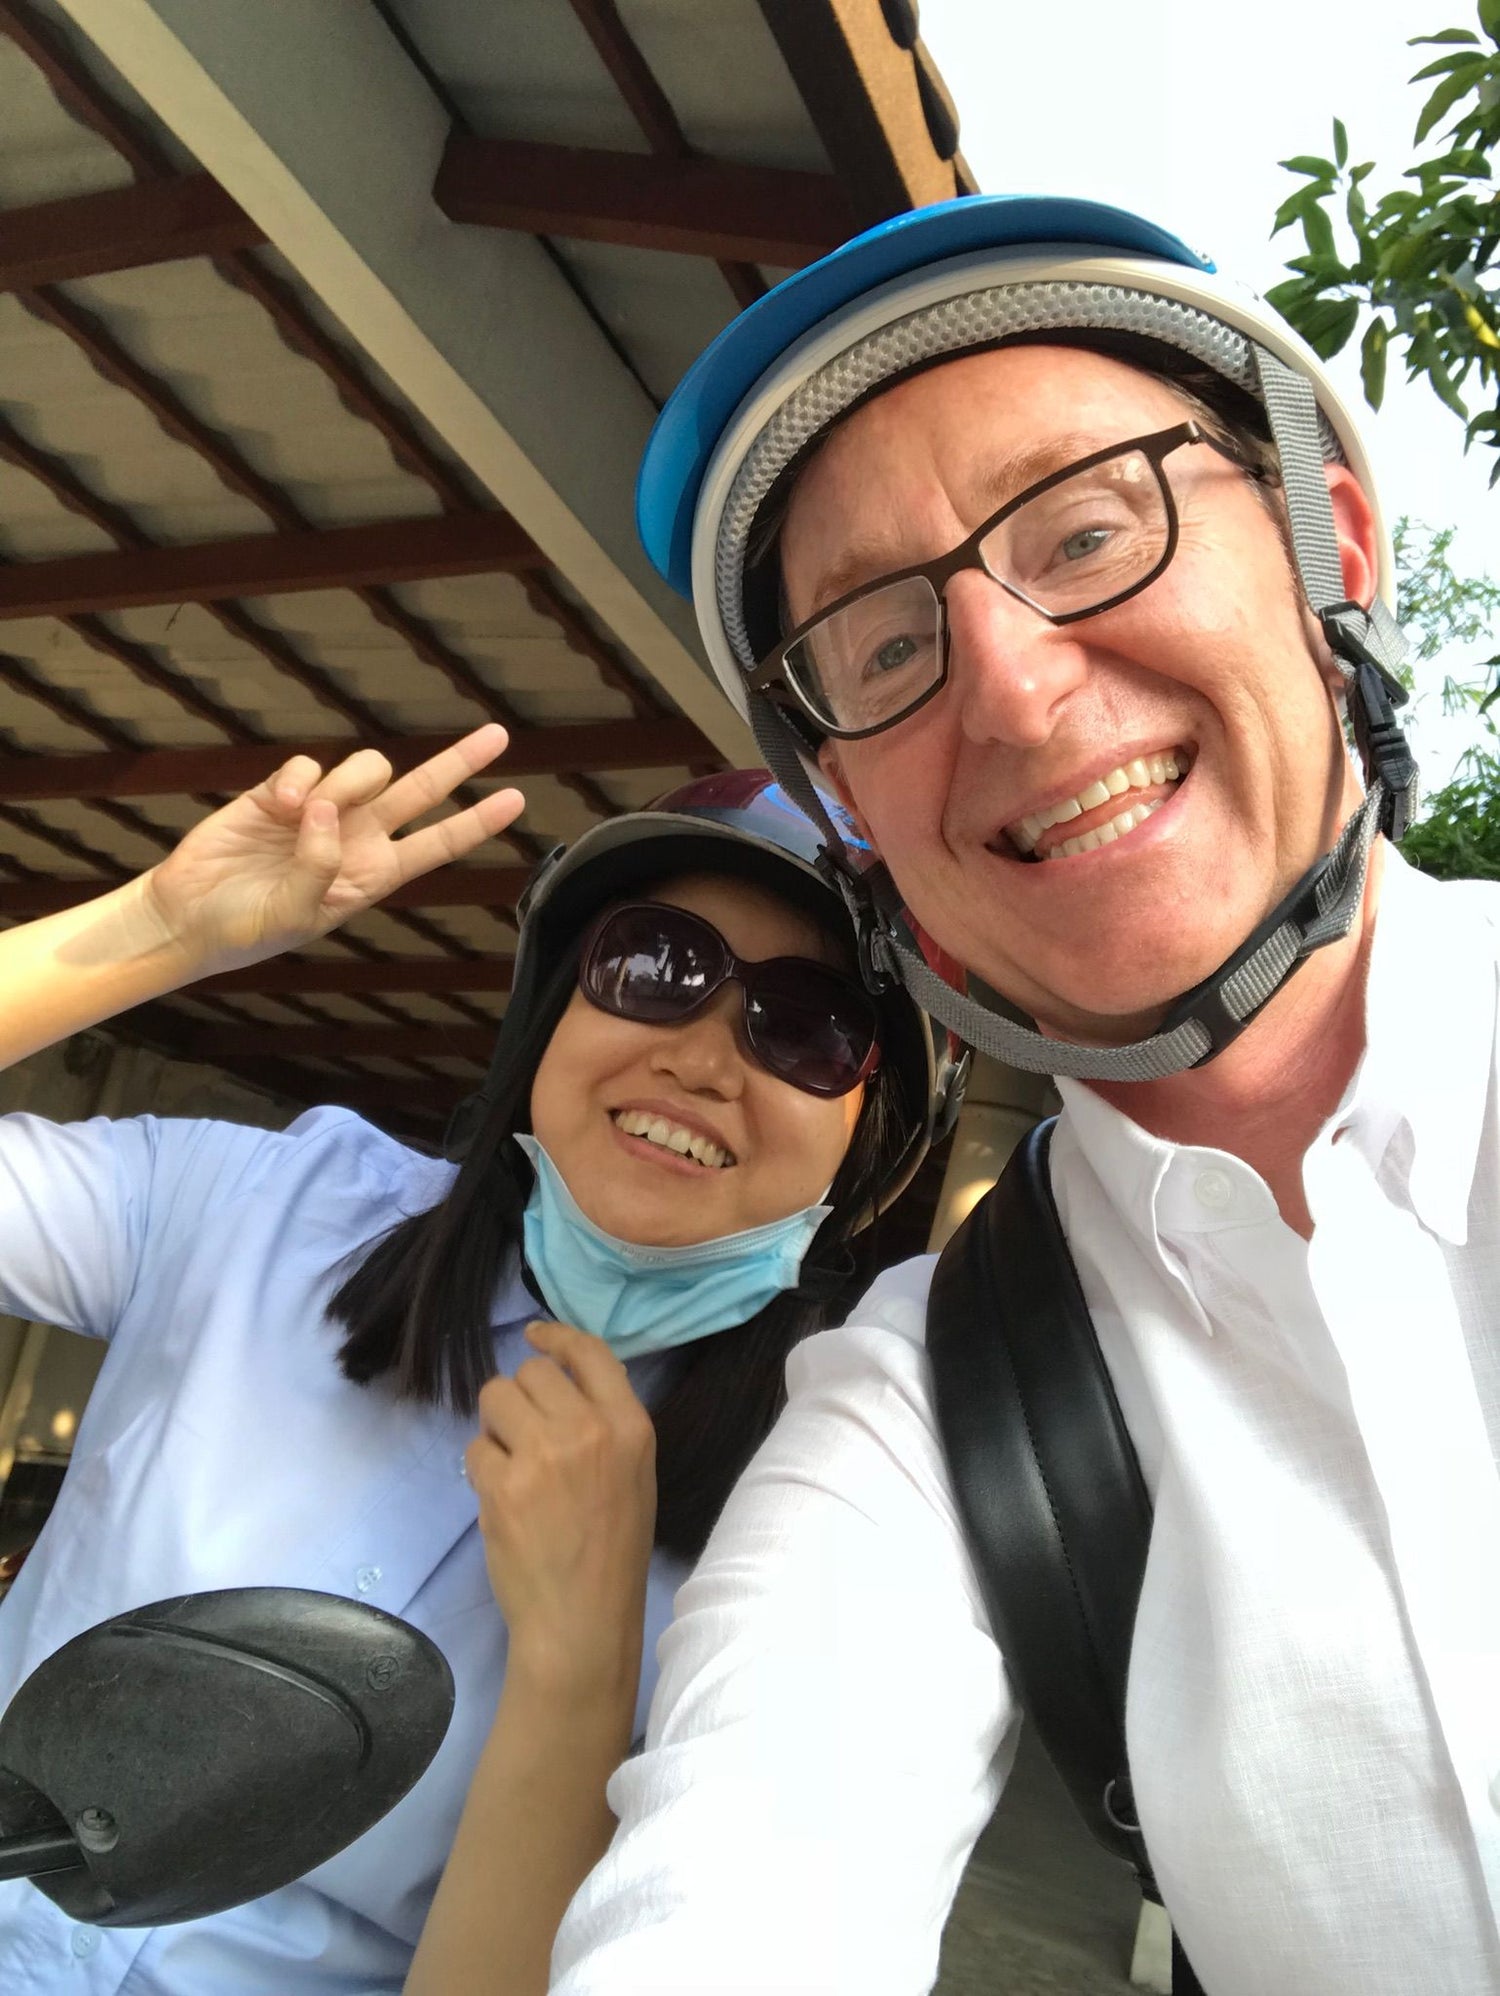 Two people in helmets smiling and posing for a selfie, one holding up a peace sign